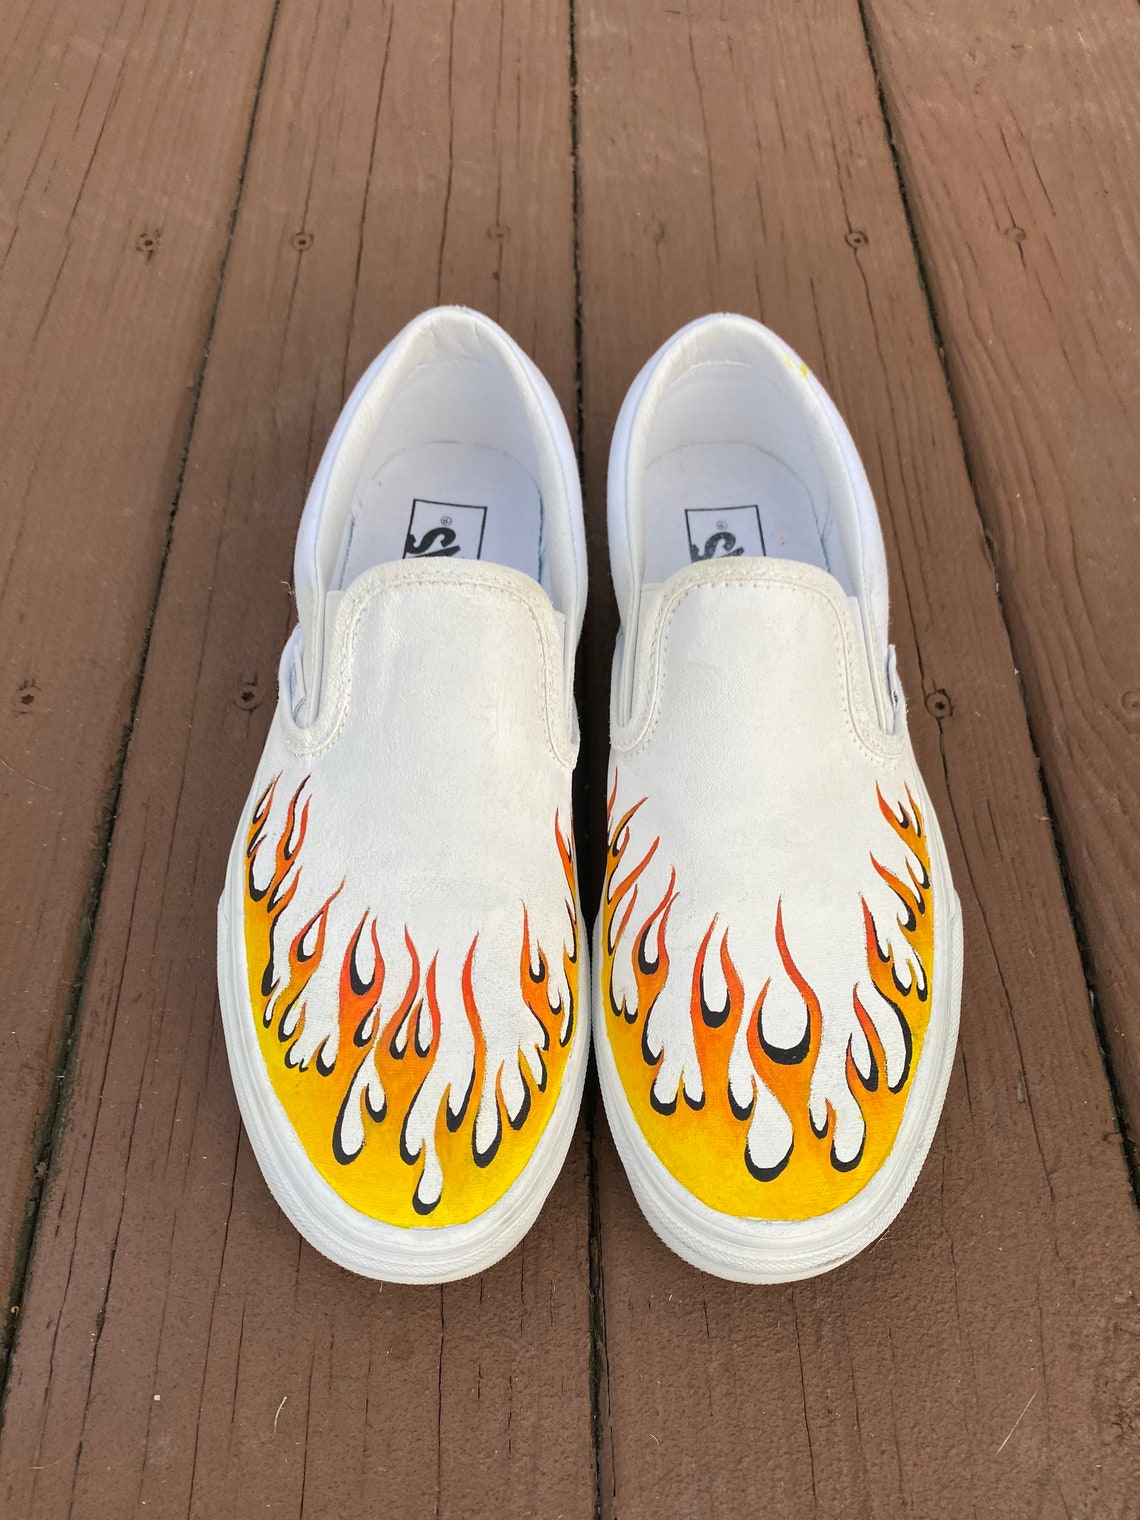 Custom Hand-Painted Ombré Flame Vans Slip-On Fire Flame Shoes | Etsy